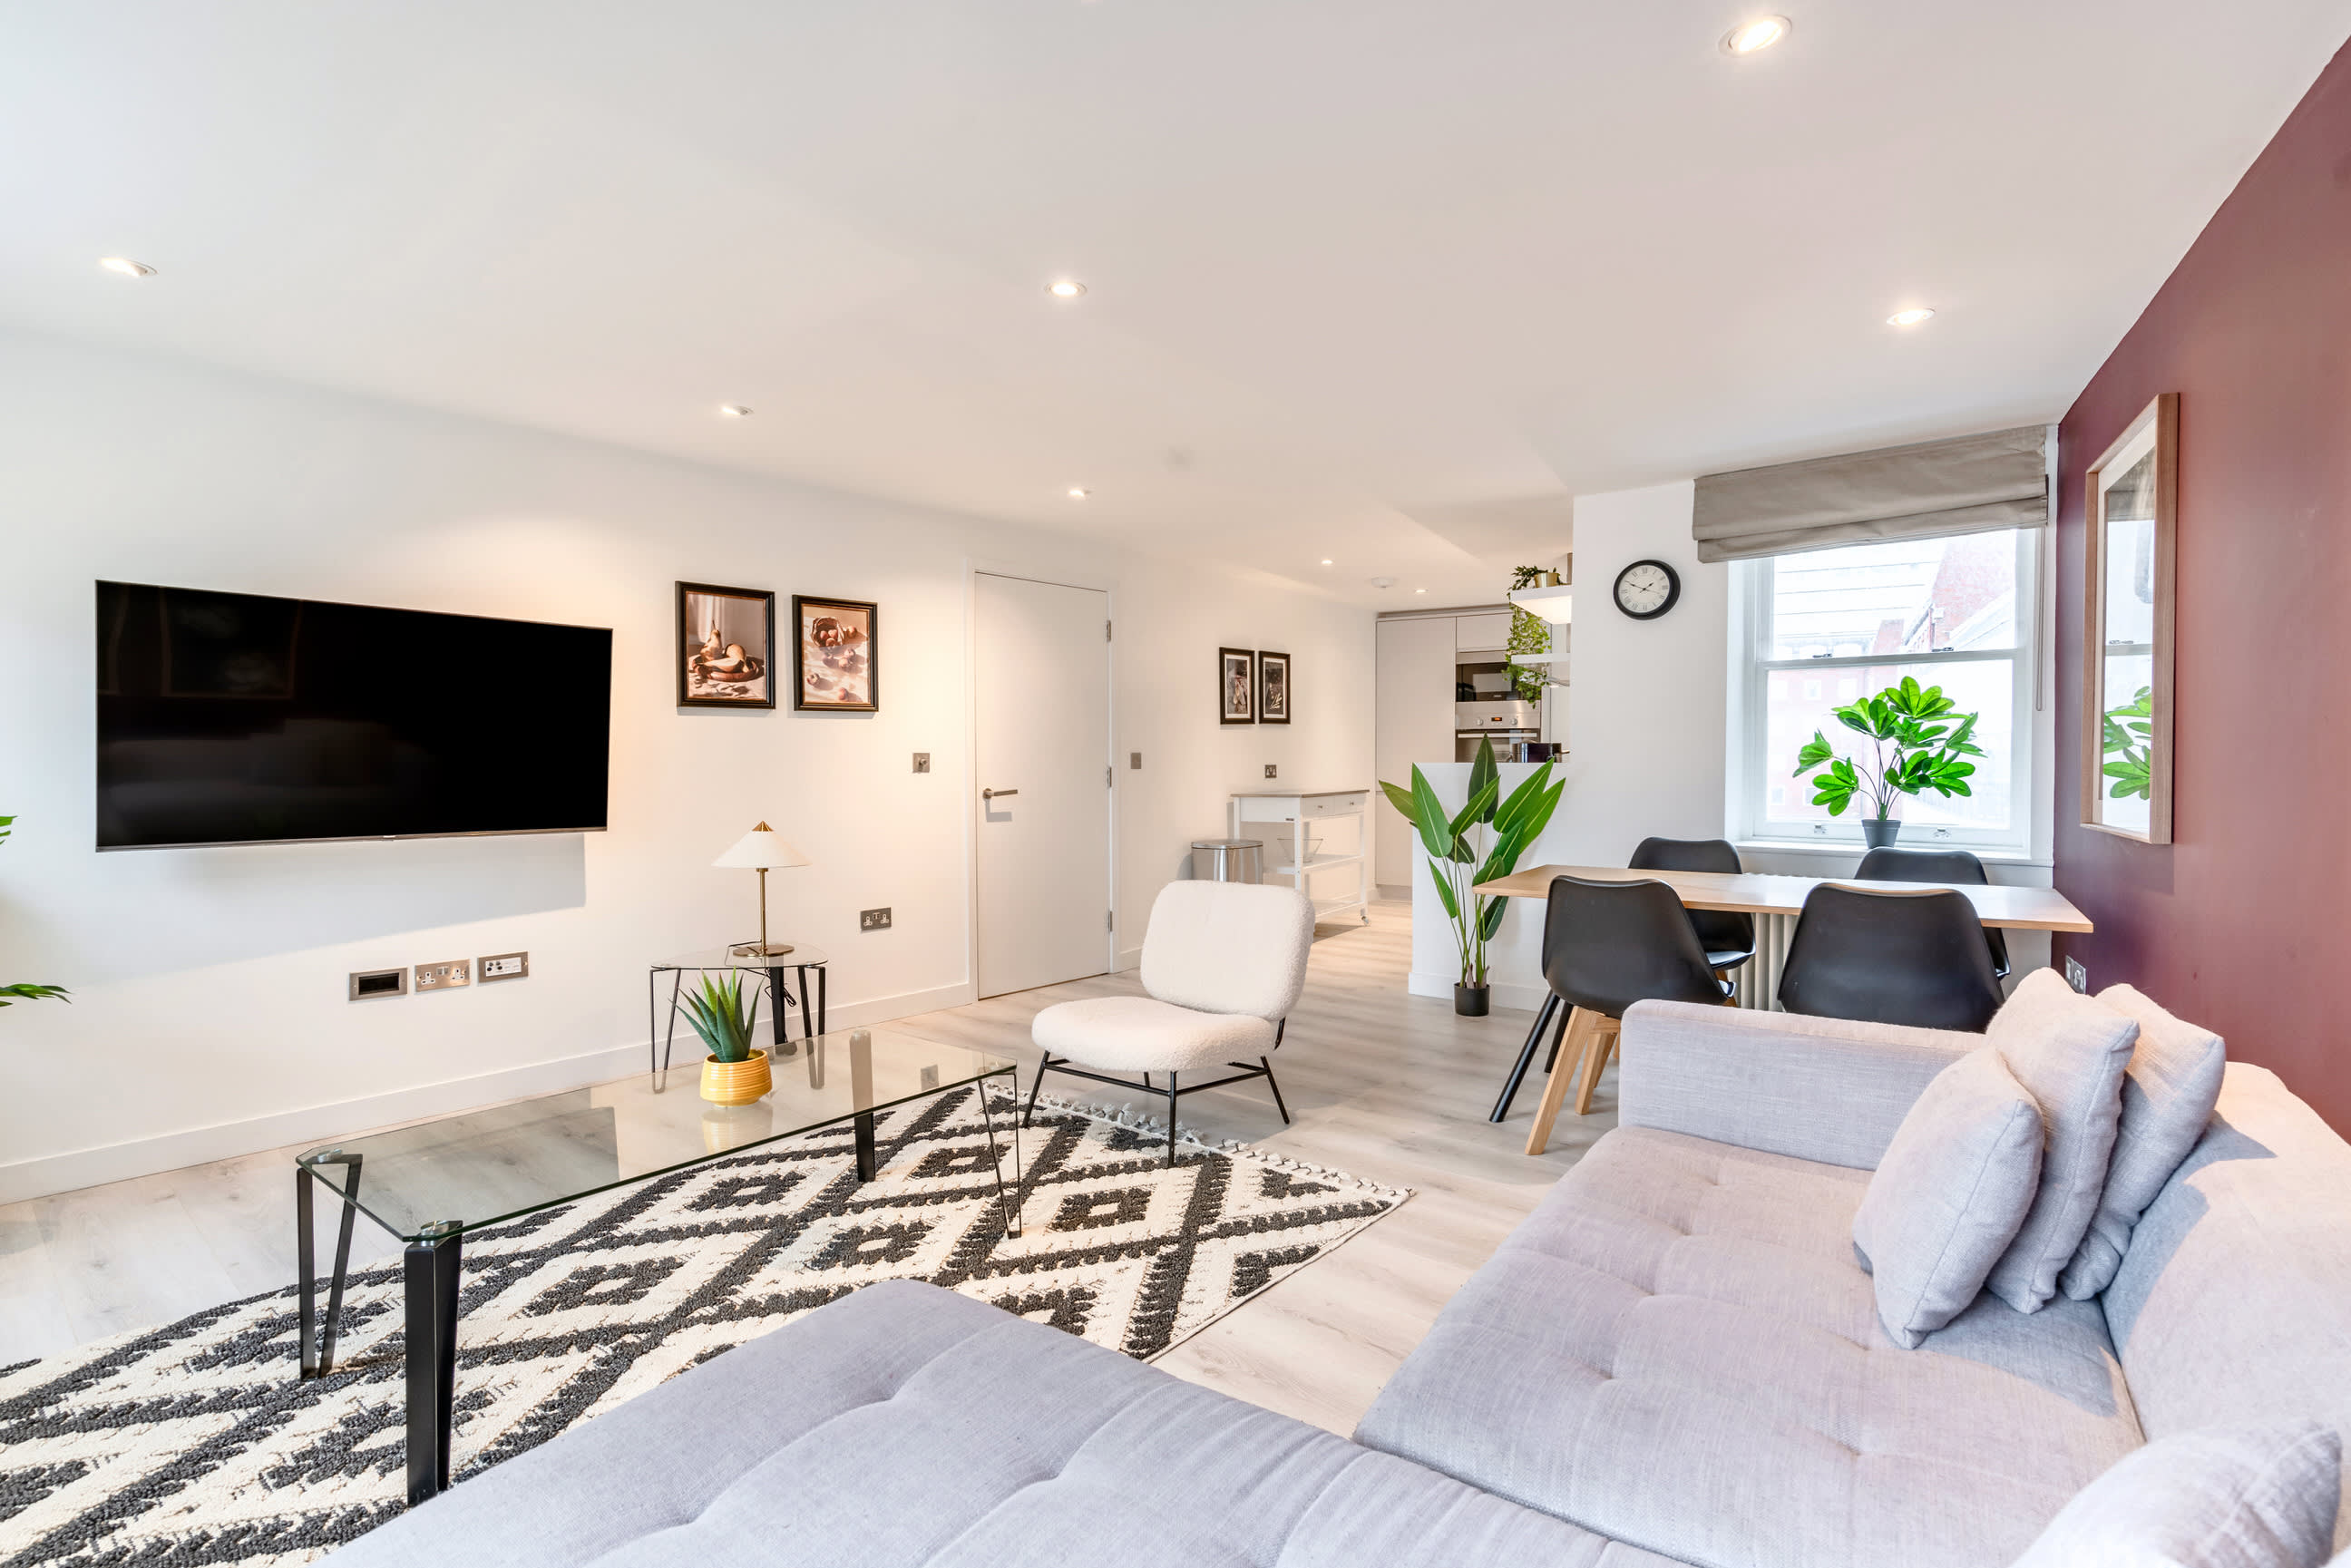 Property Image 1 - Stunning Airy Apartment opposite the Borough Market